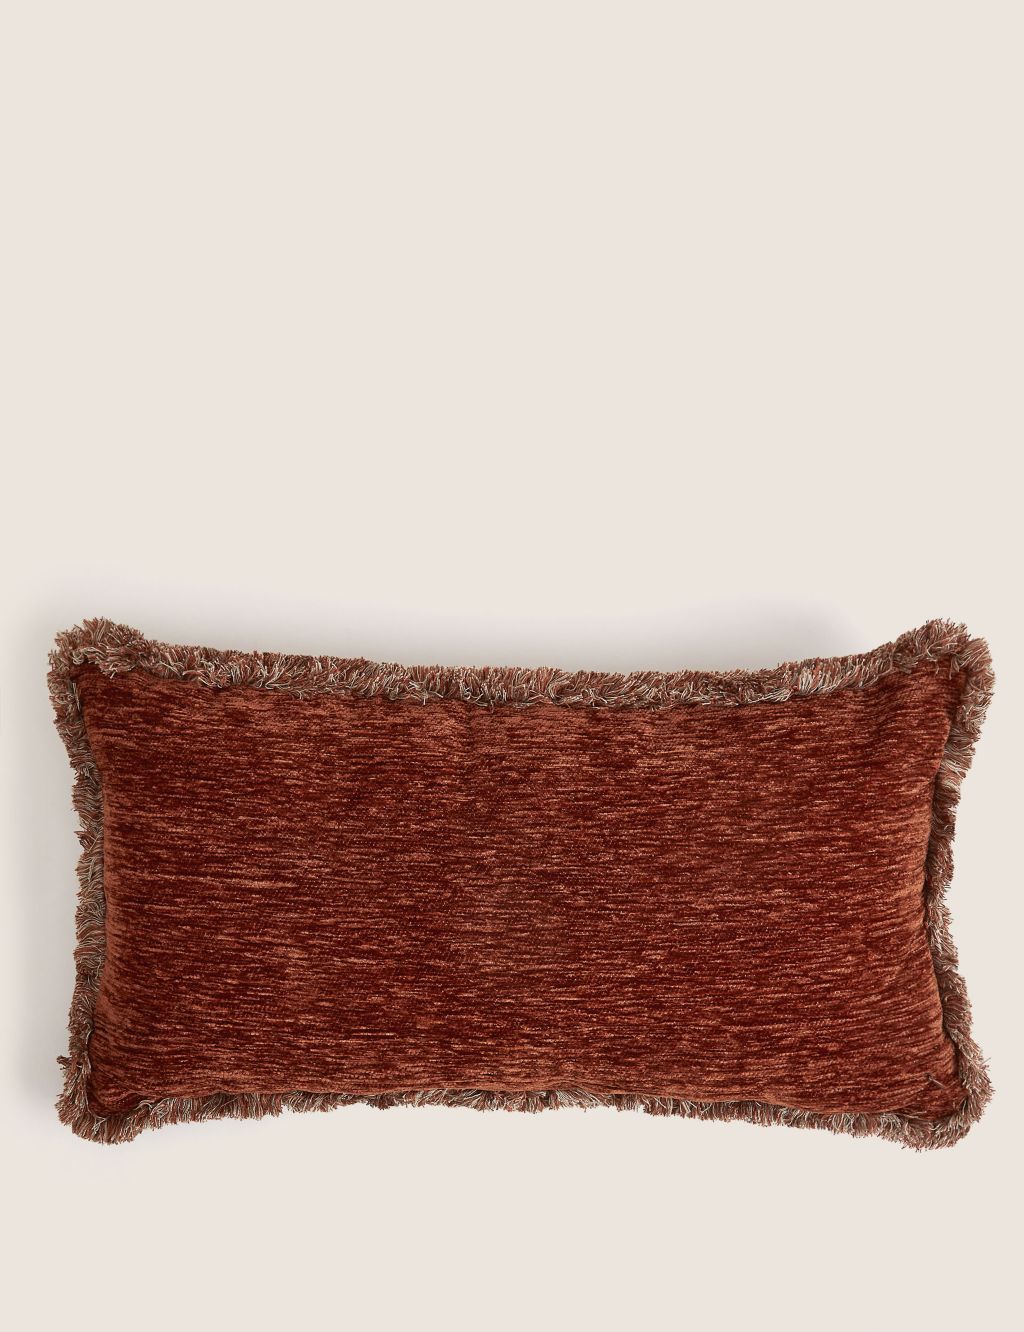 Chenille Patterned Bolster Cushion image 6